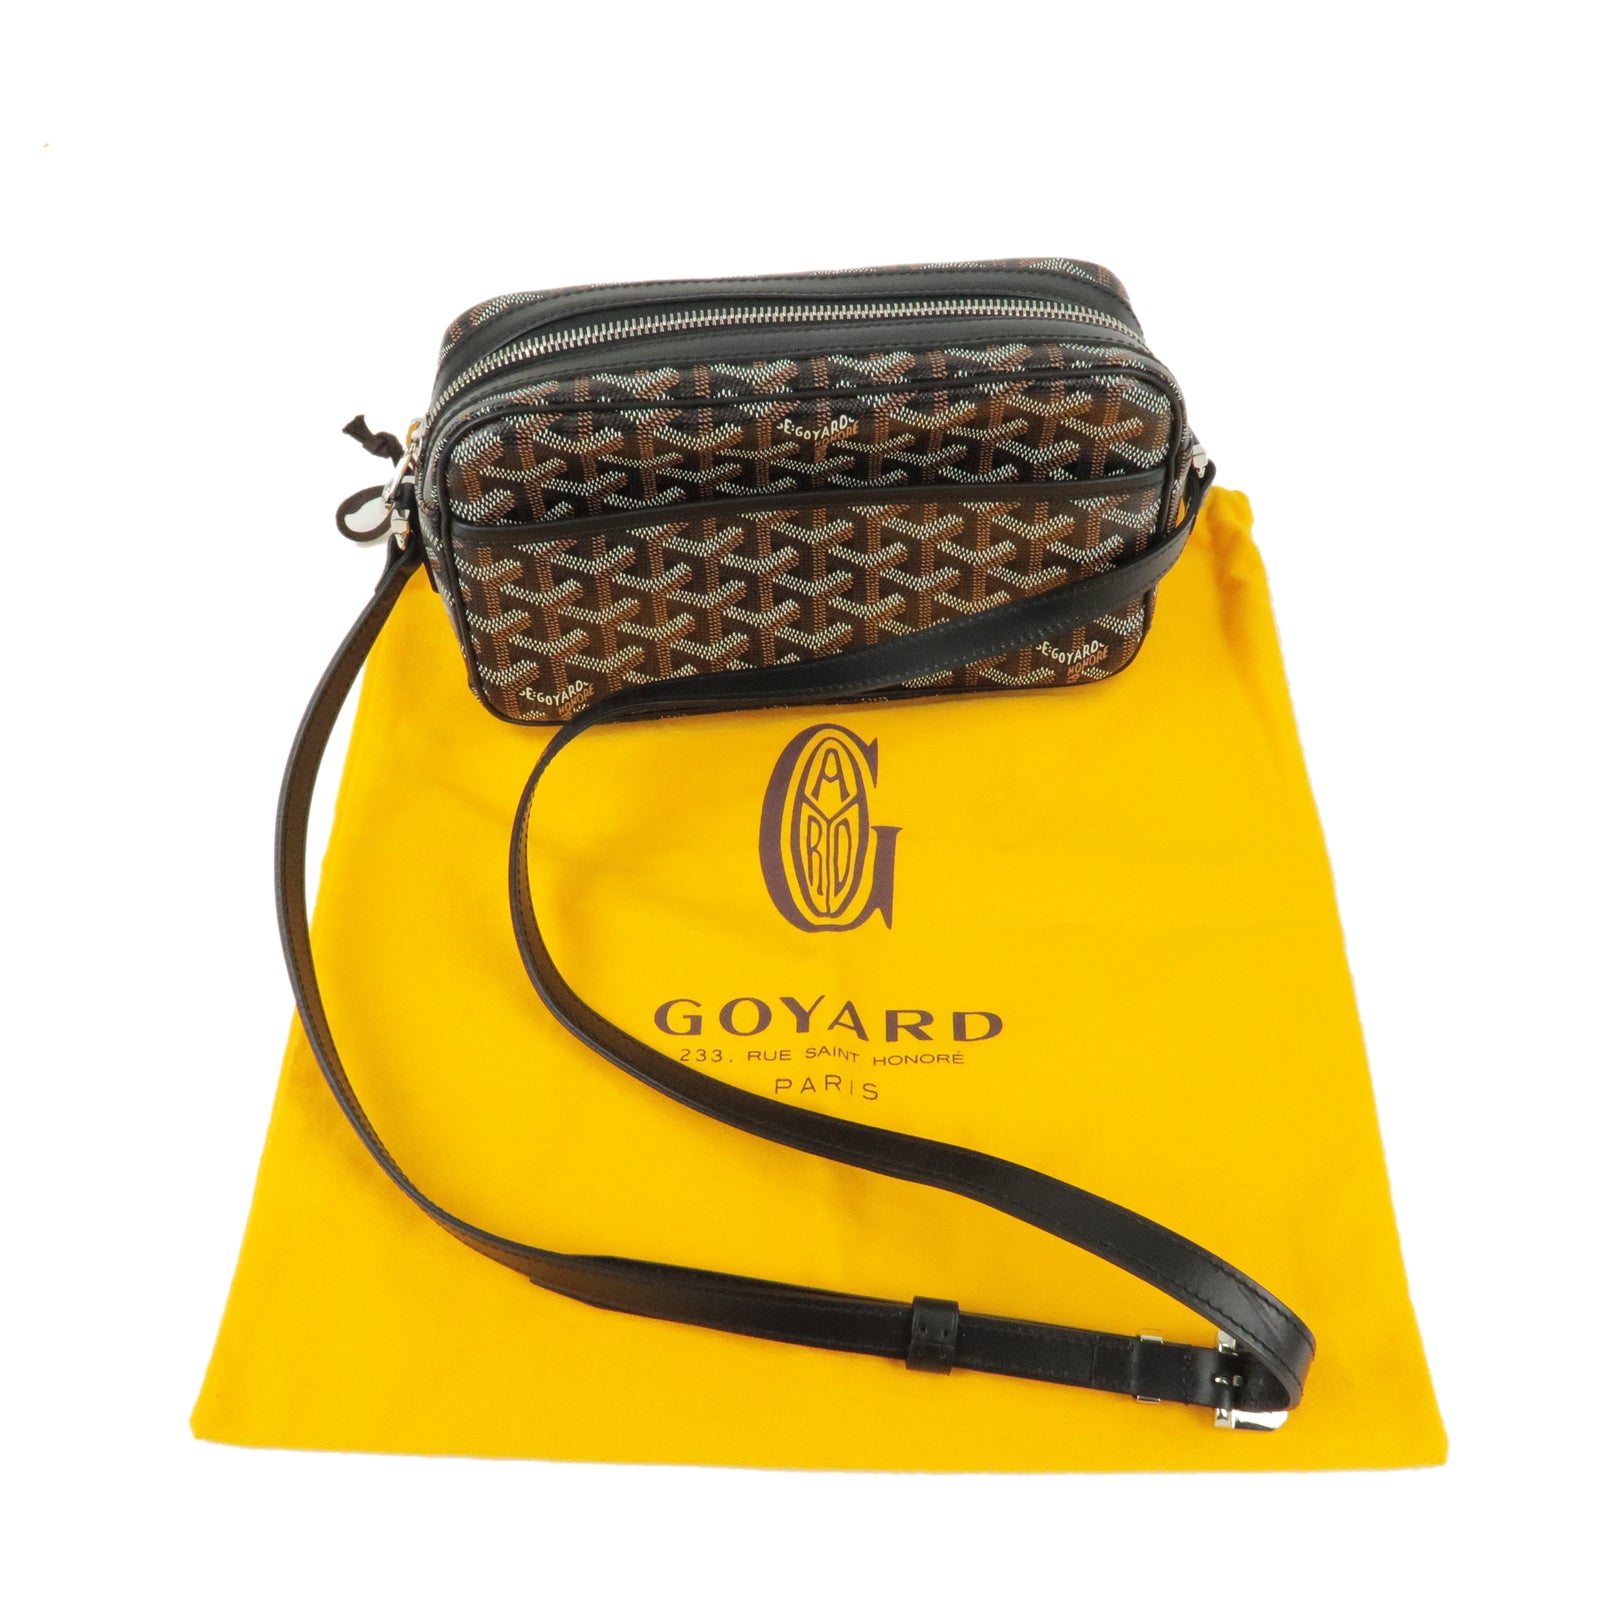 Goyard handles coming out like clay and staining everything